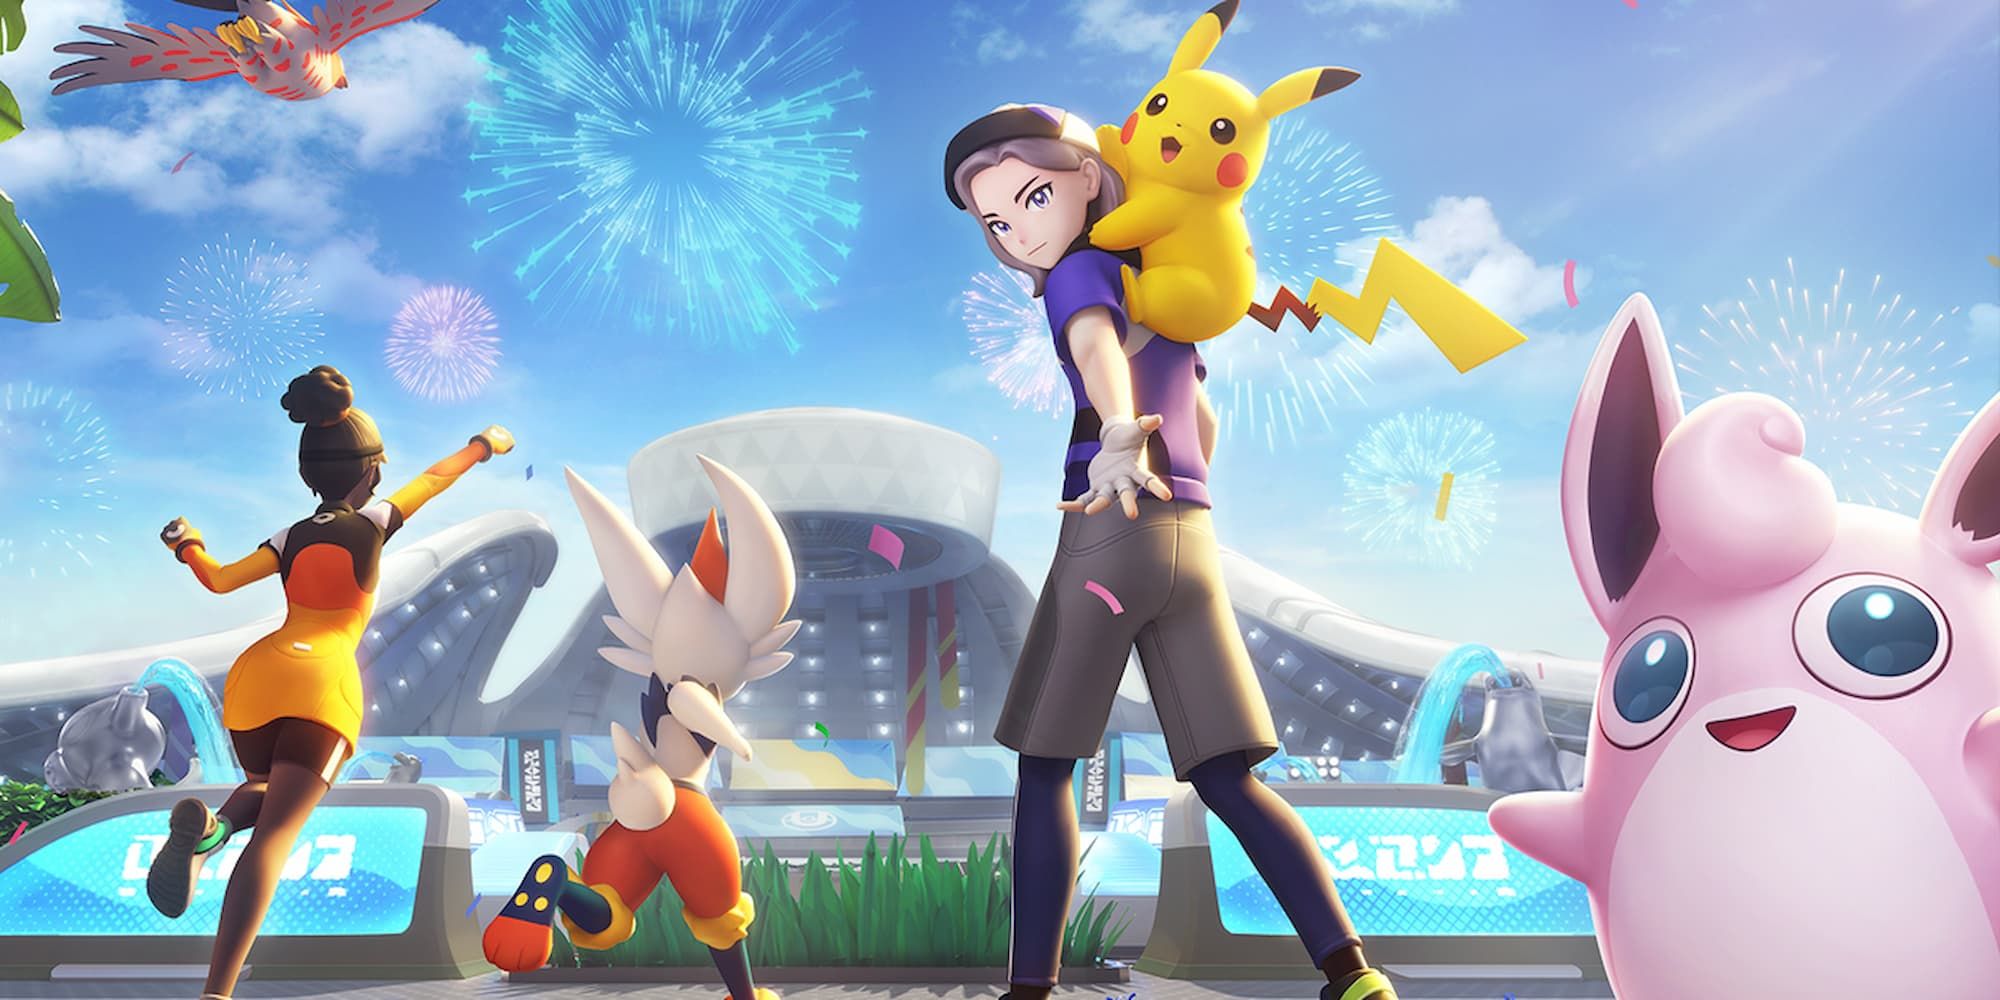 A trainer with Pikachu on their back walks towards the stadium alongside another trainer and other Pokemon in Pokemon Unite.